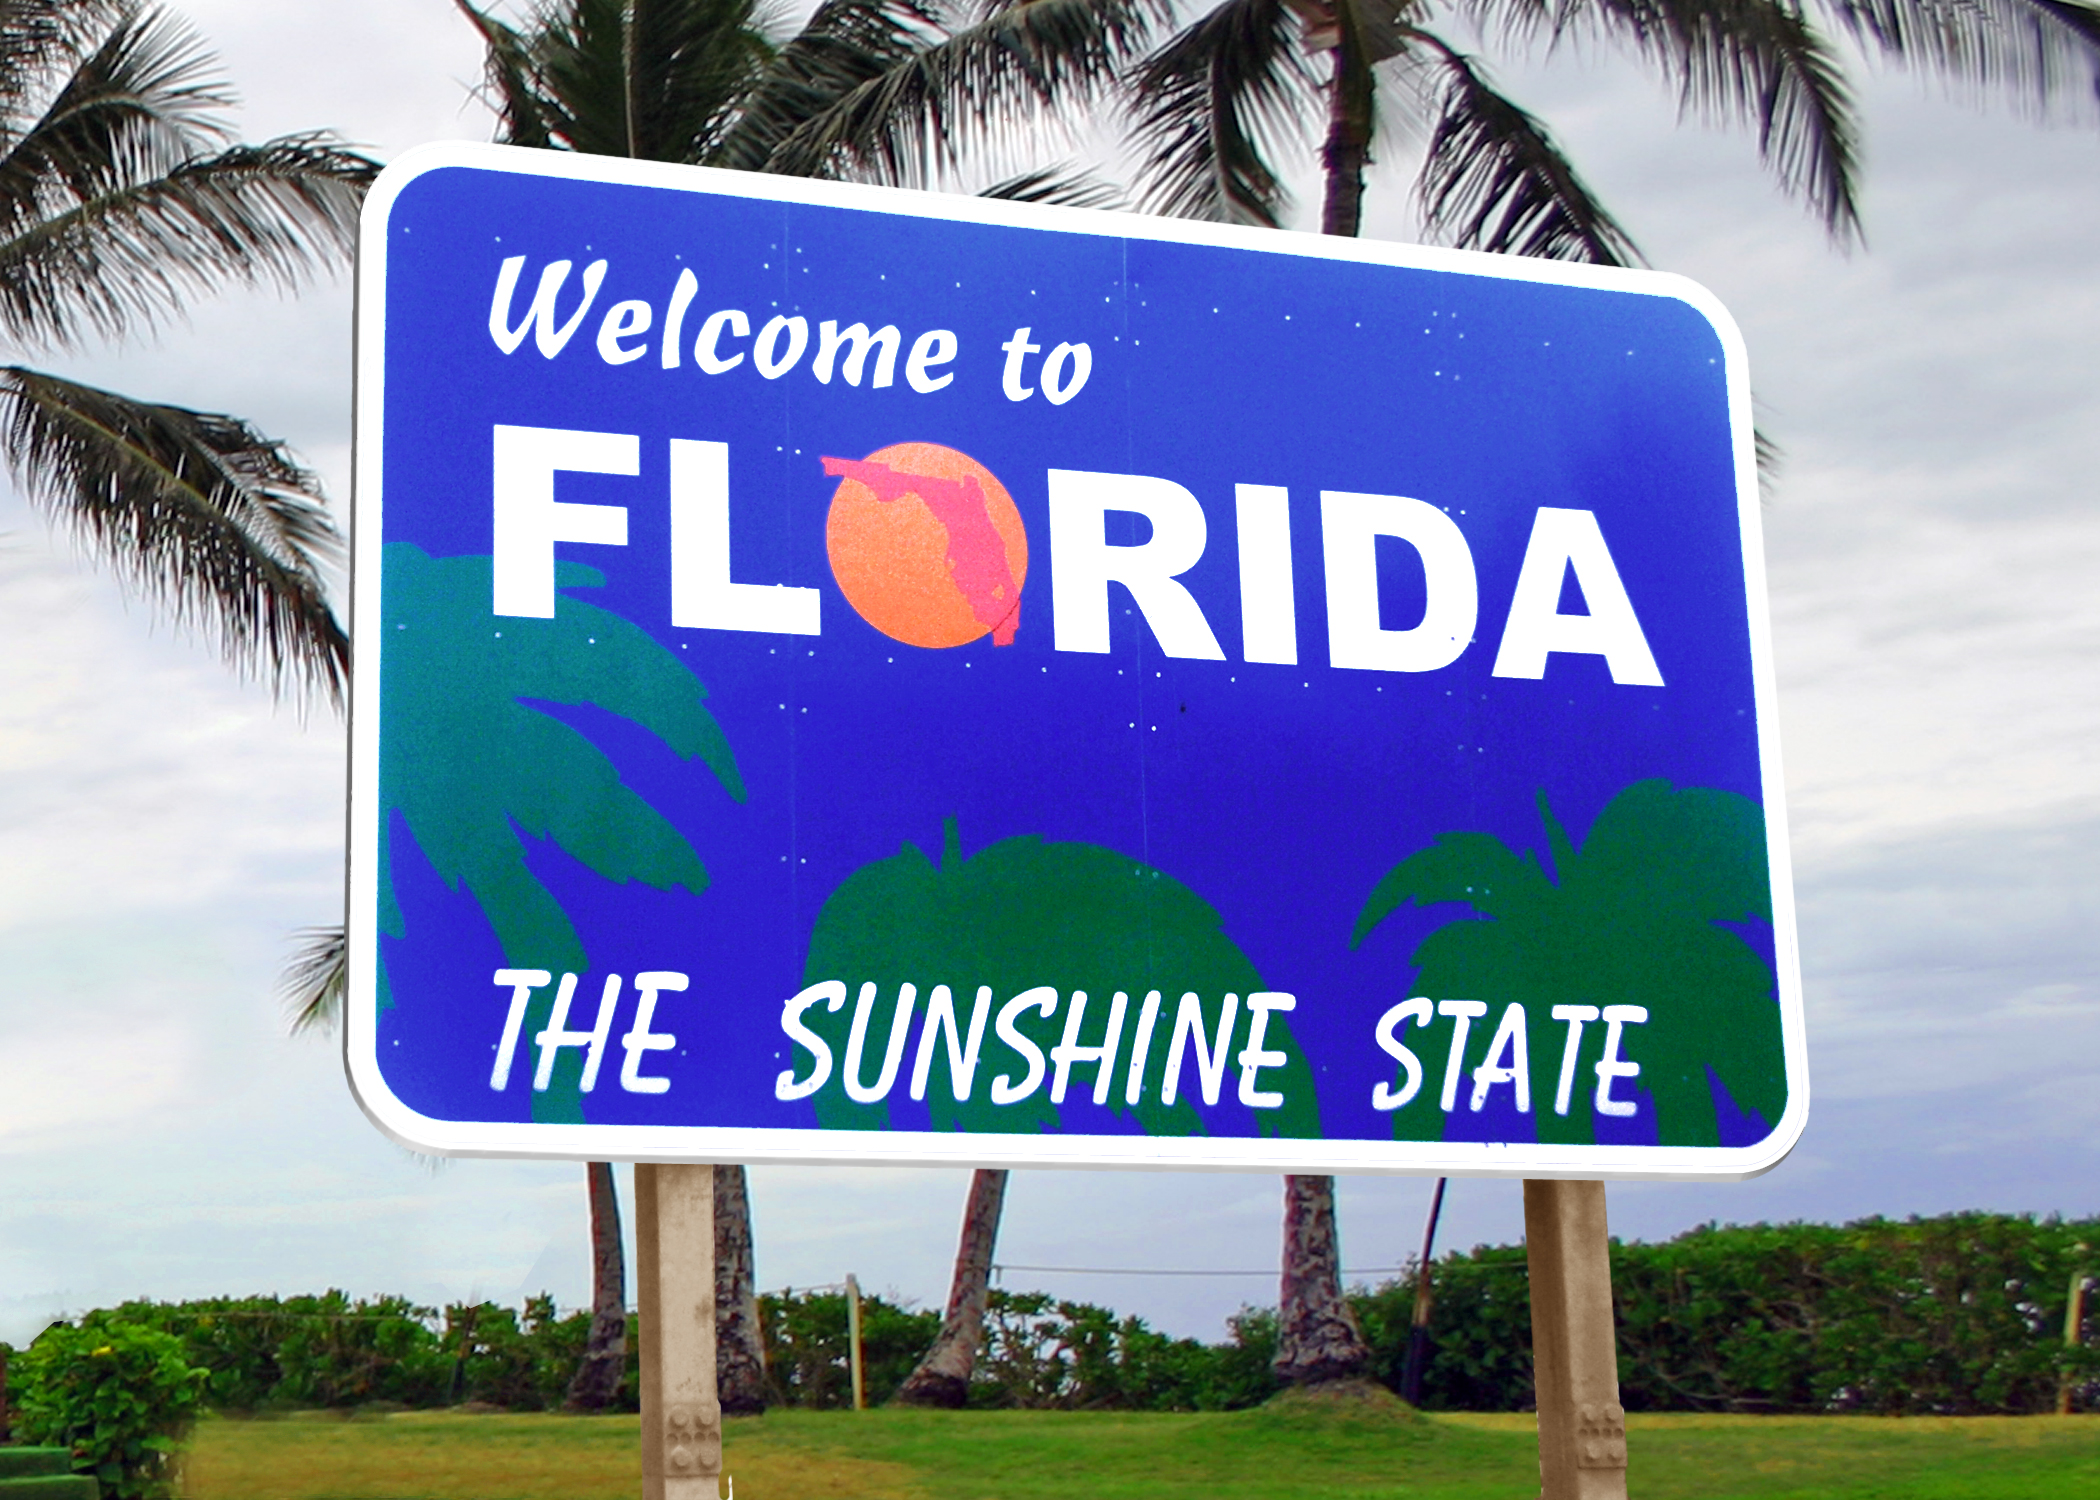 What are some interesting facts about Florida marriage law?